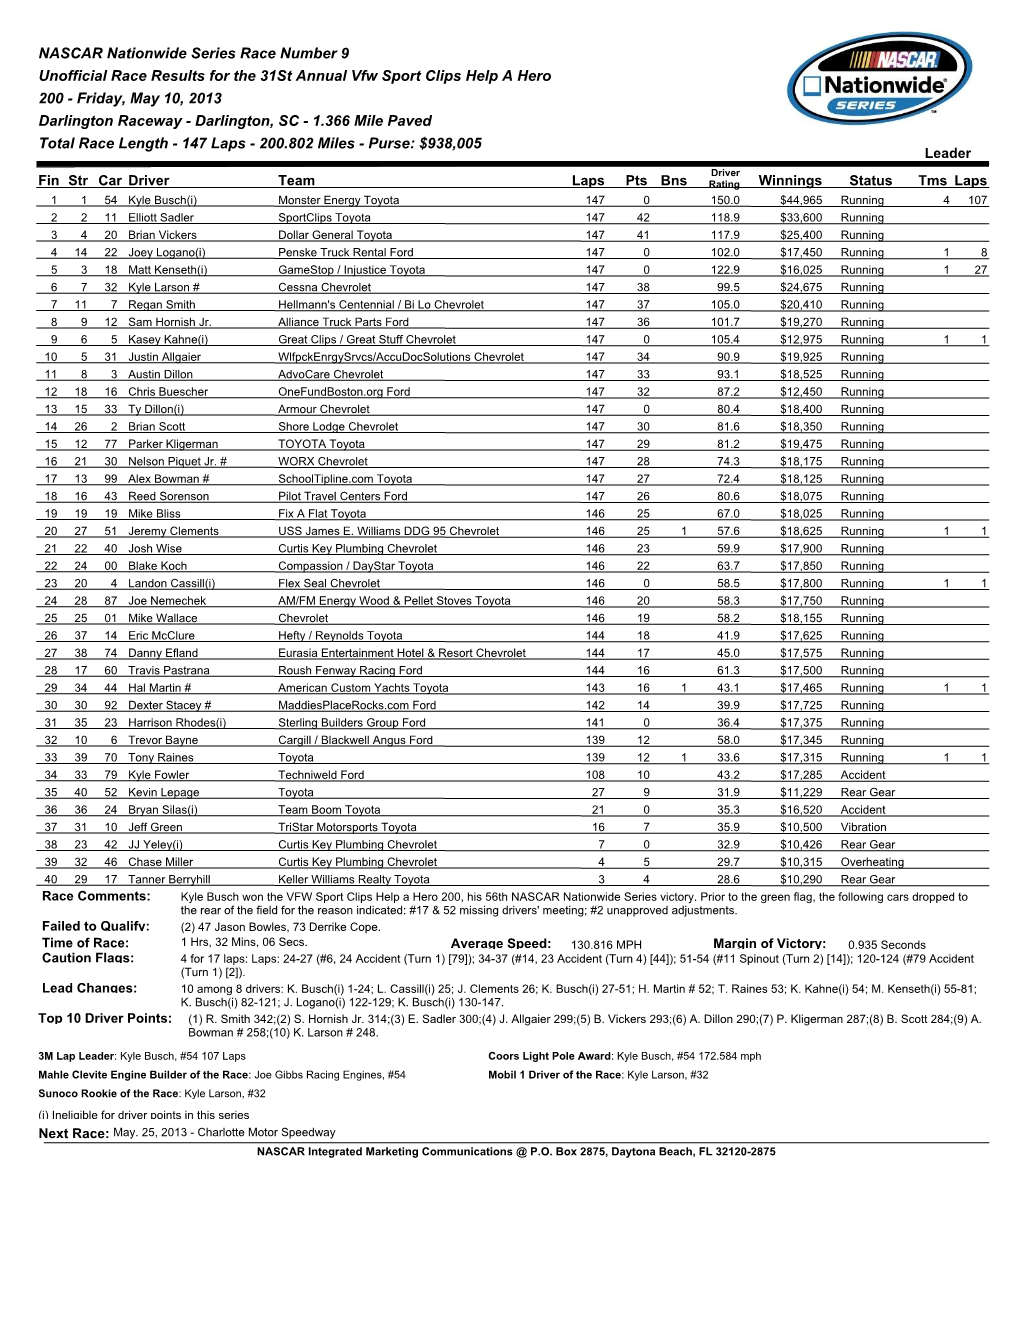 NASCAR Nationwide Series Race Number 9 Unofficial Race